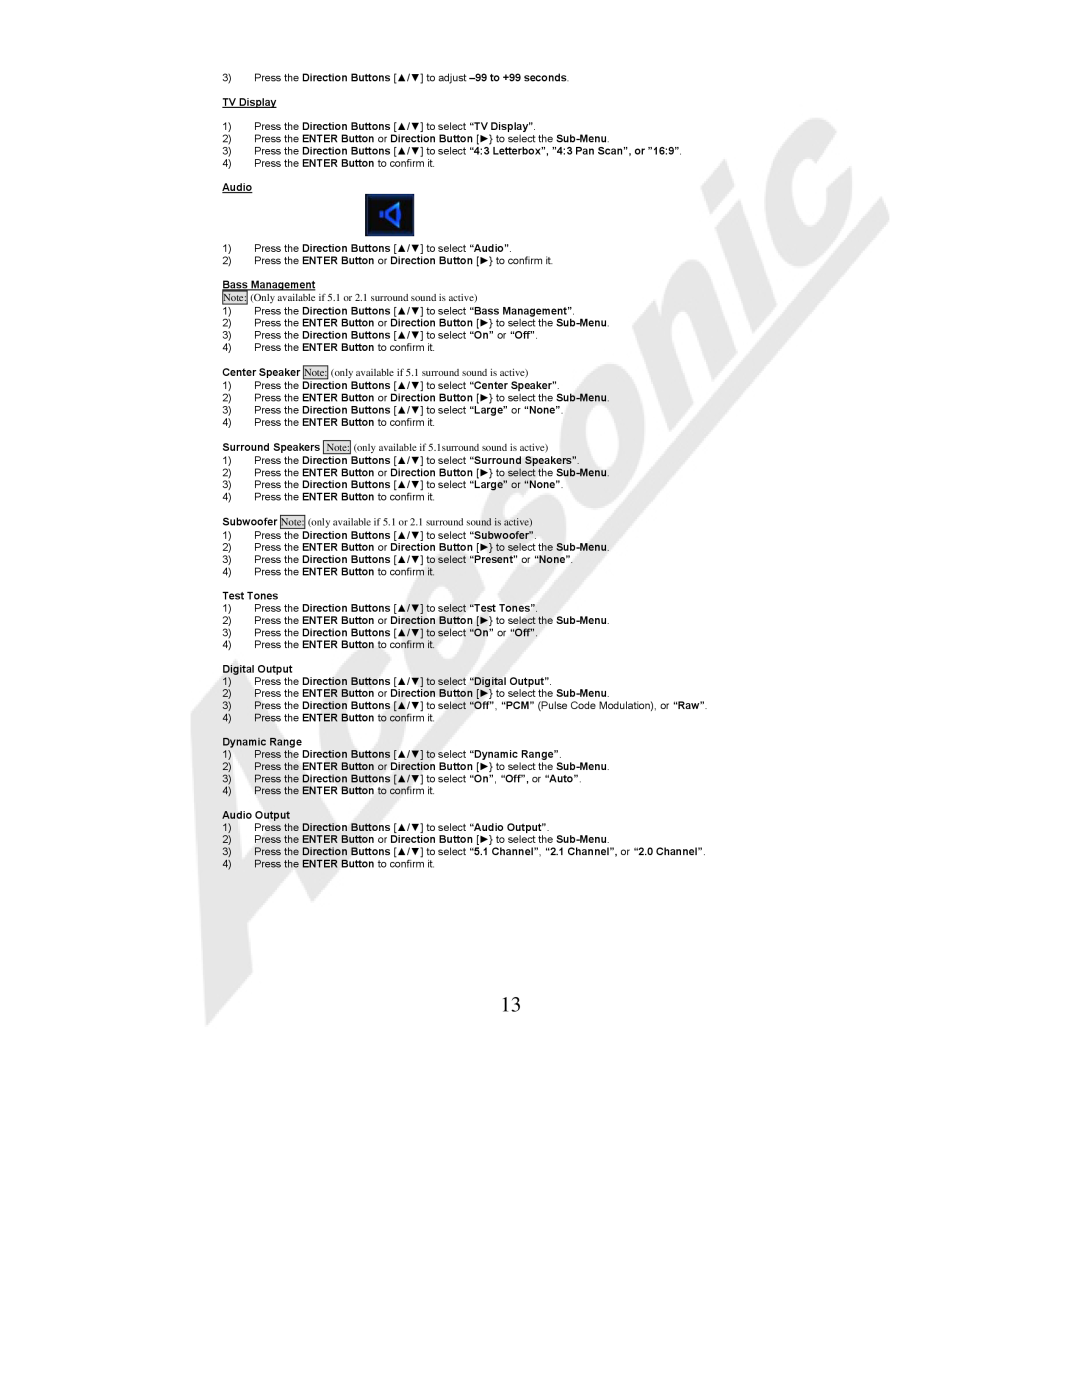 Acesonic BDK-2000 user manual Note Only available if 5.1 or 2.1 surround sound is active 